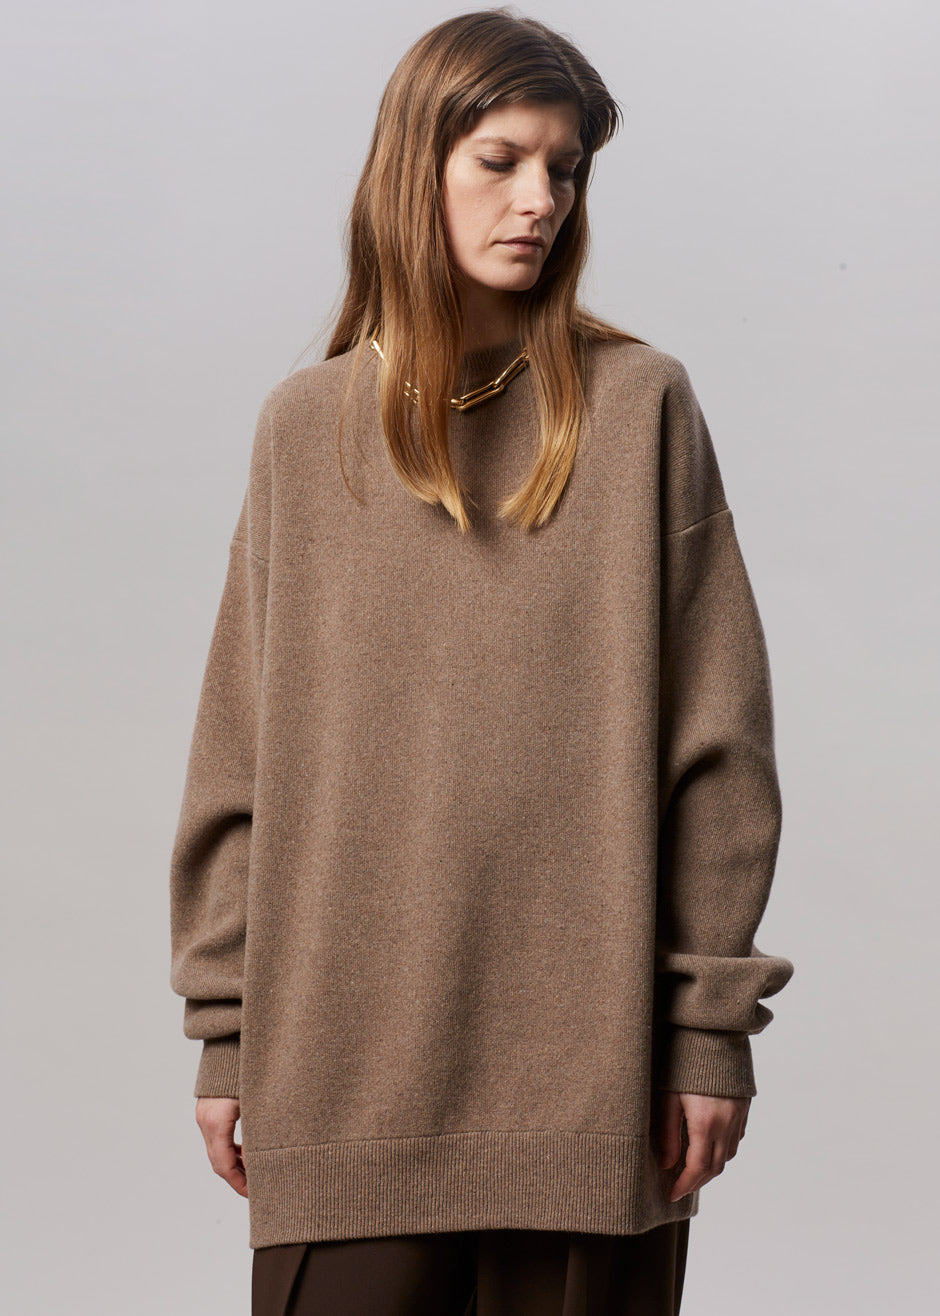 Hadrien Italian Recycled Cashmere Sweater - Taupe - 3